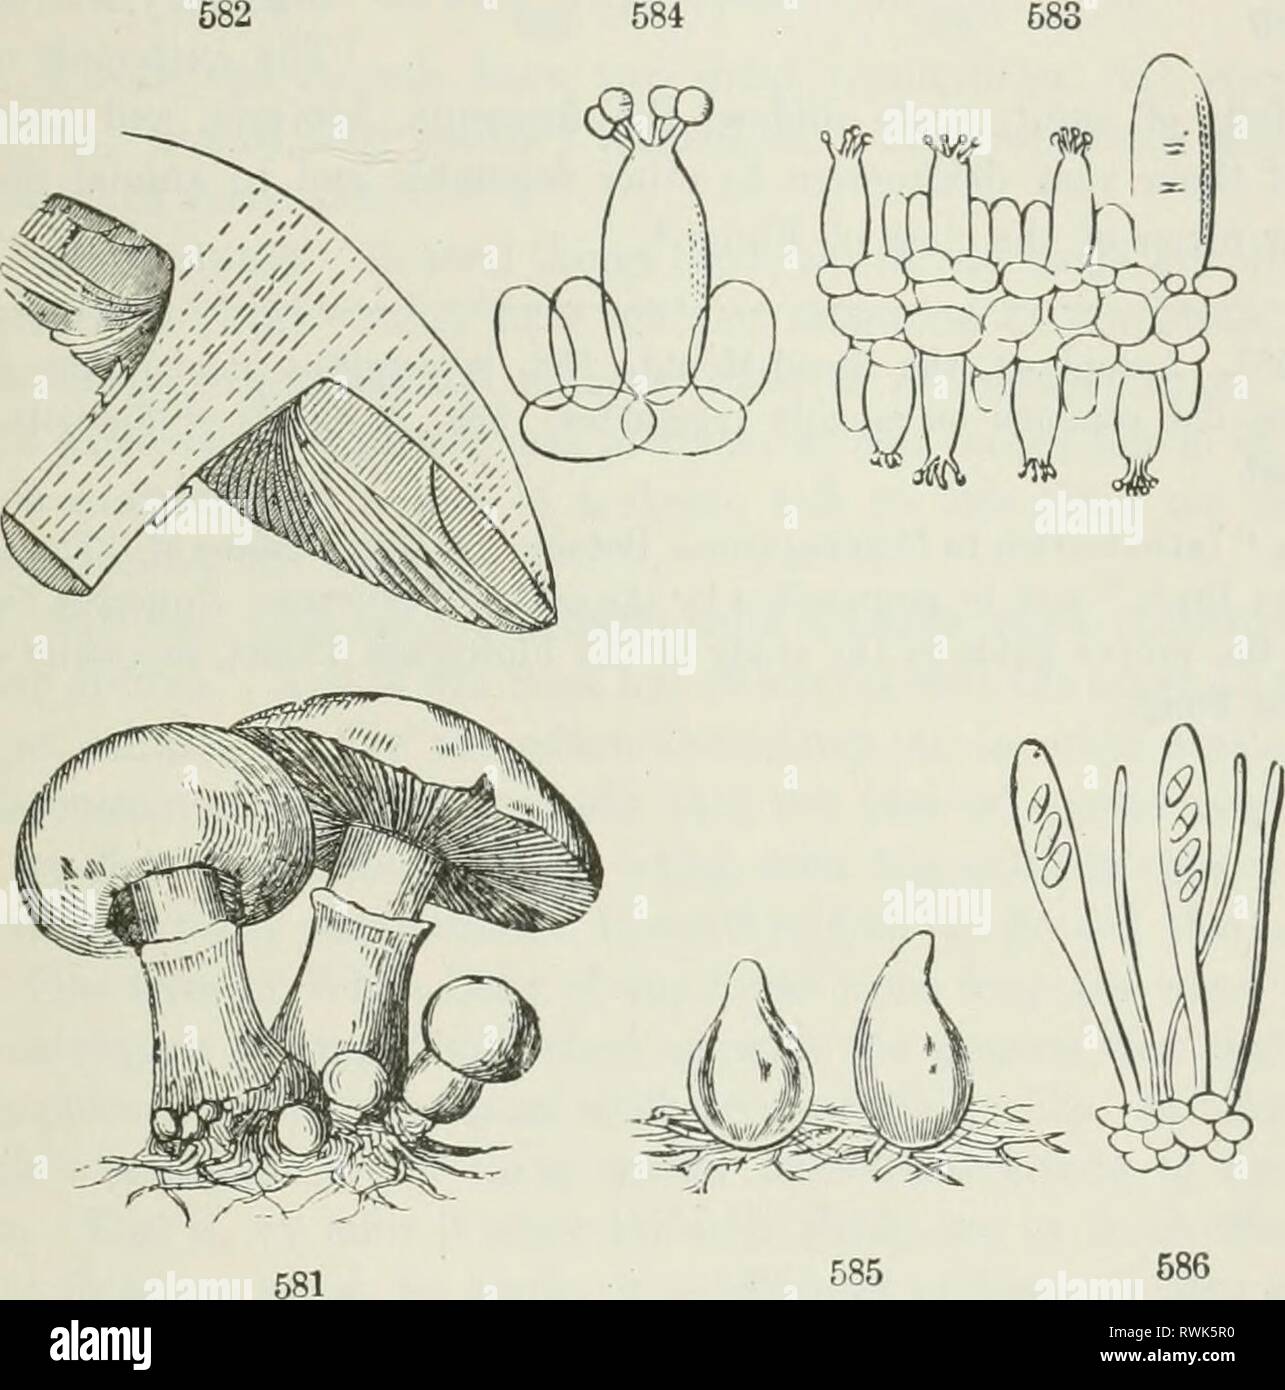 The elements of botany for The elements of botany for beginners and for schools elementsbotany00gray Year: 1887  SECTION 17.] THALLOPHYTES. 173 cells lengthen and branch, growing by the absorption through their whole surface ot' the decaying, or orgunizable, or living matter wiiieh they feed upon. In a Mushroom (Agaricus), a kuol)by mass is at length formed, which develops into a stout stalk (Sl/'pr), bearing tlie cap {PUeus) : tlie under side of tlic cap is covered by the Ih/nienium, in this genus consisting of radiating plates, tlie gills or LamelLe; and these bear the powdery spores in imme Stock Photo